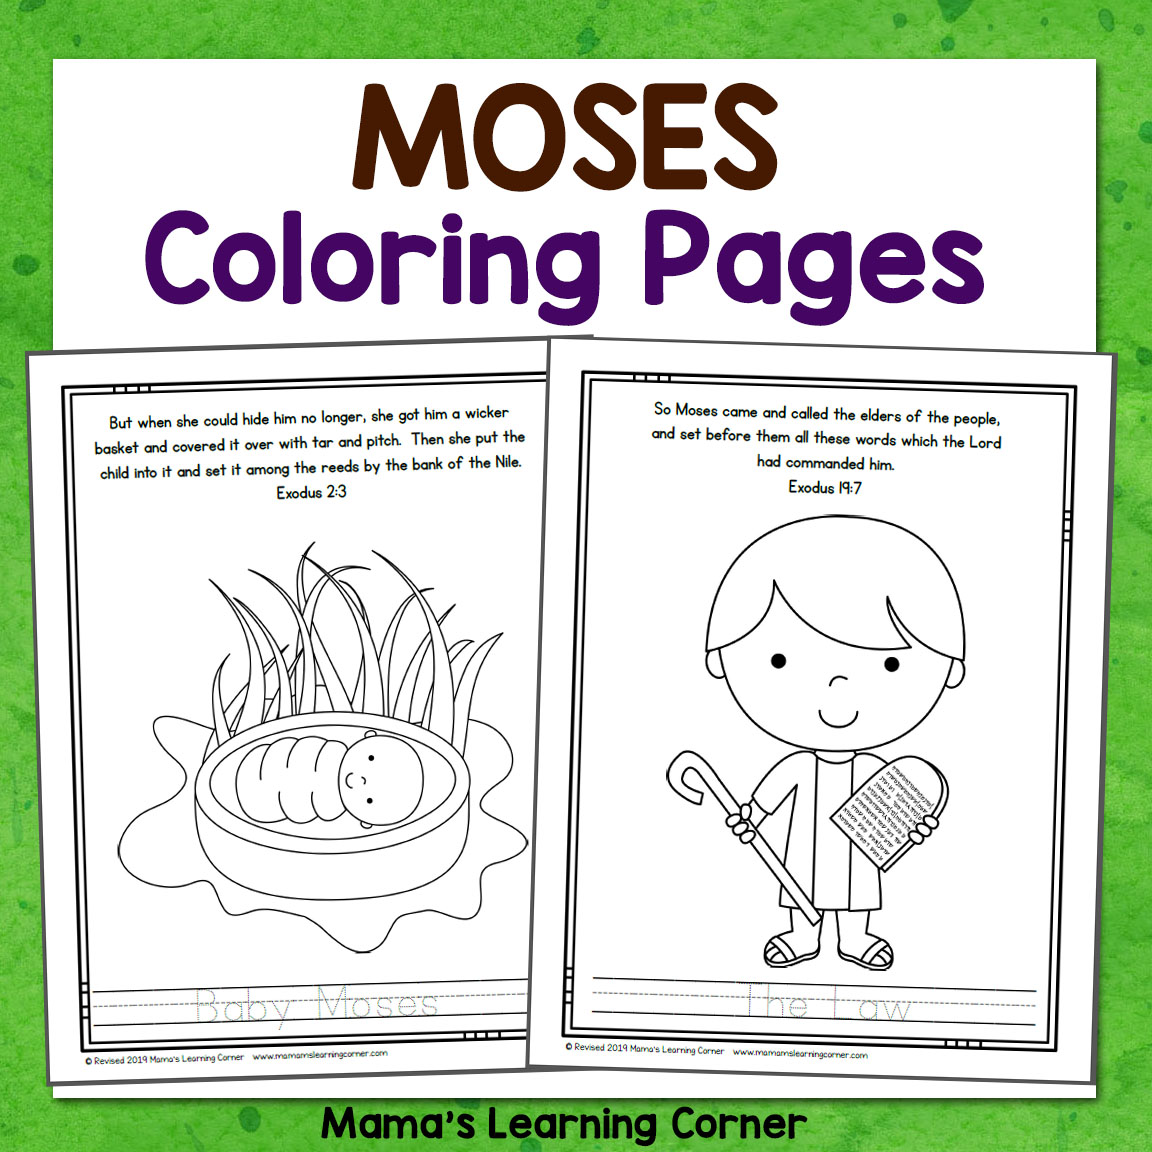 Moses coloring pages